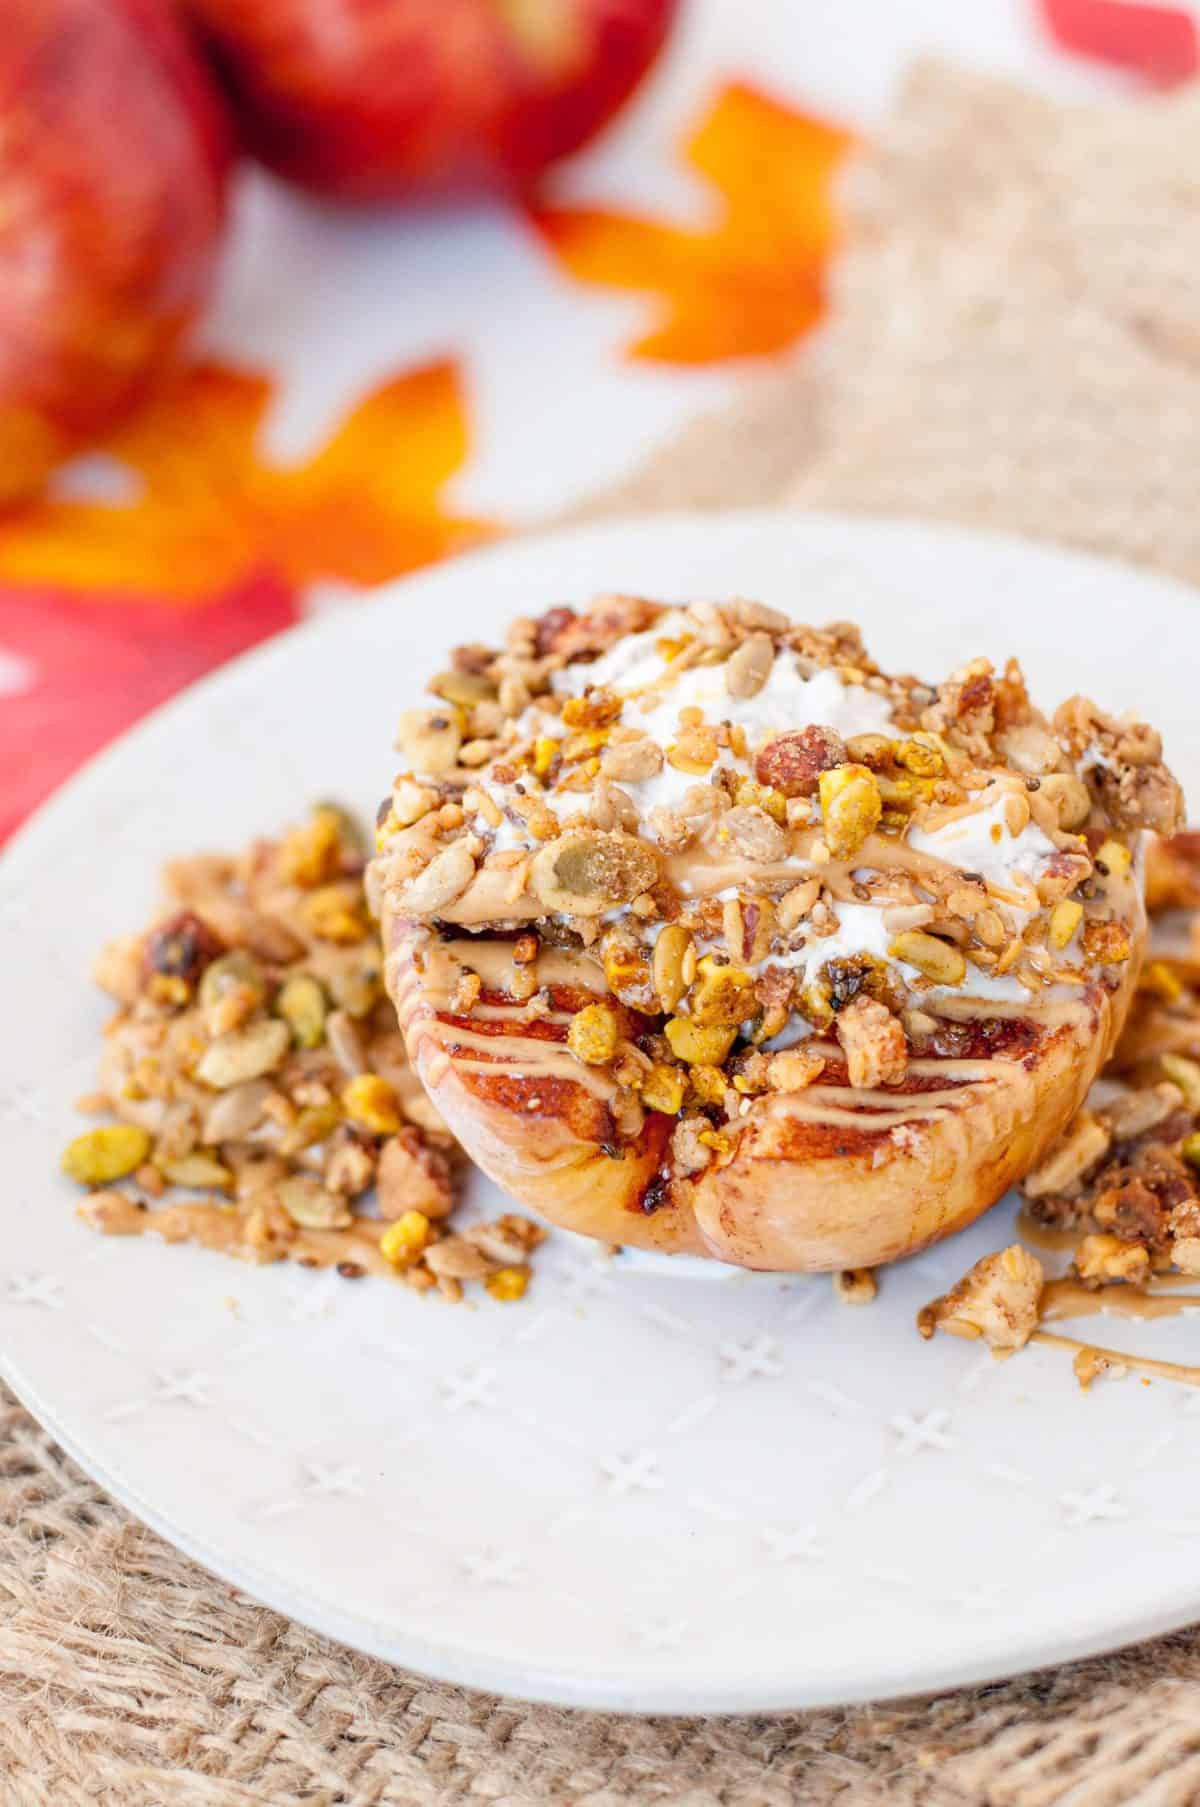 Baked Apple topped with granola, peanut butter, and whipped cream, surrounded by fall decorations